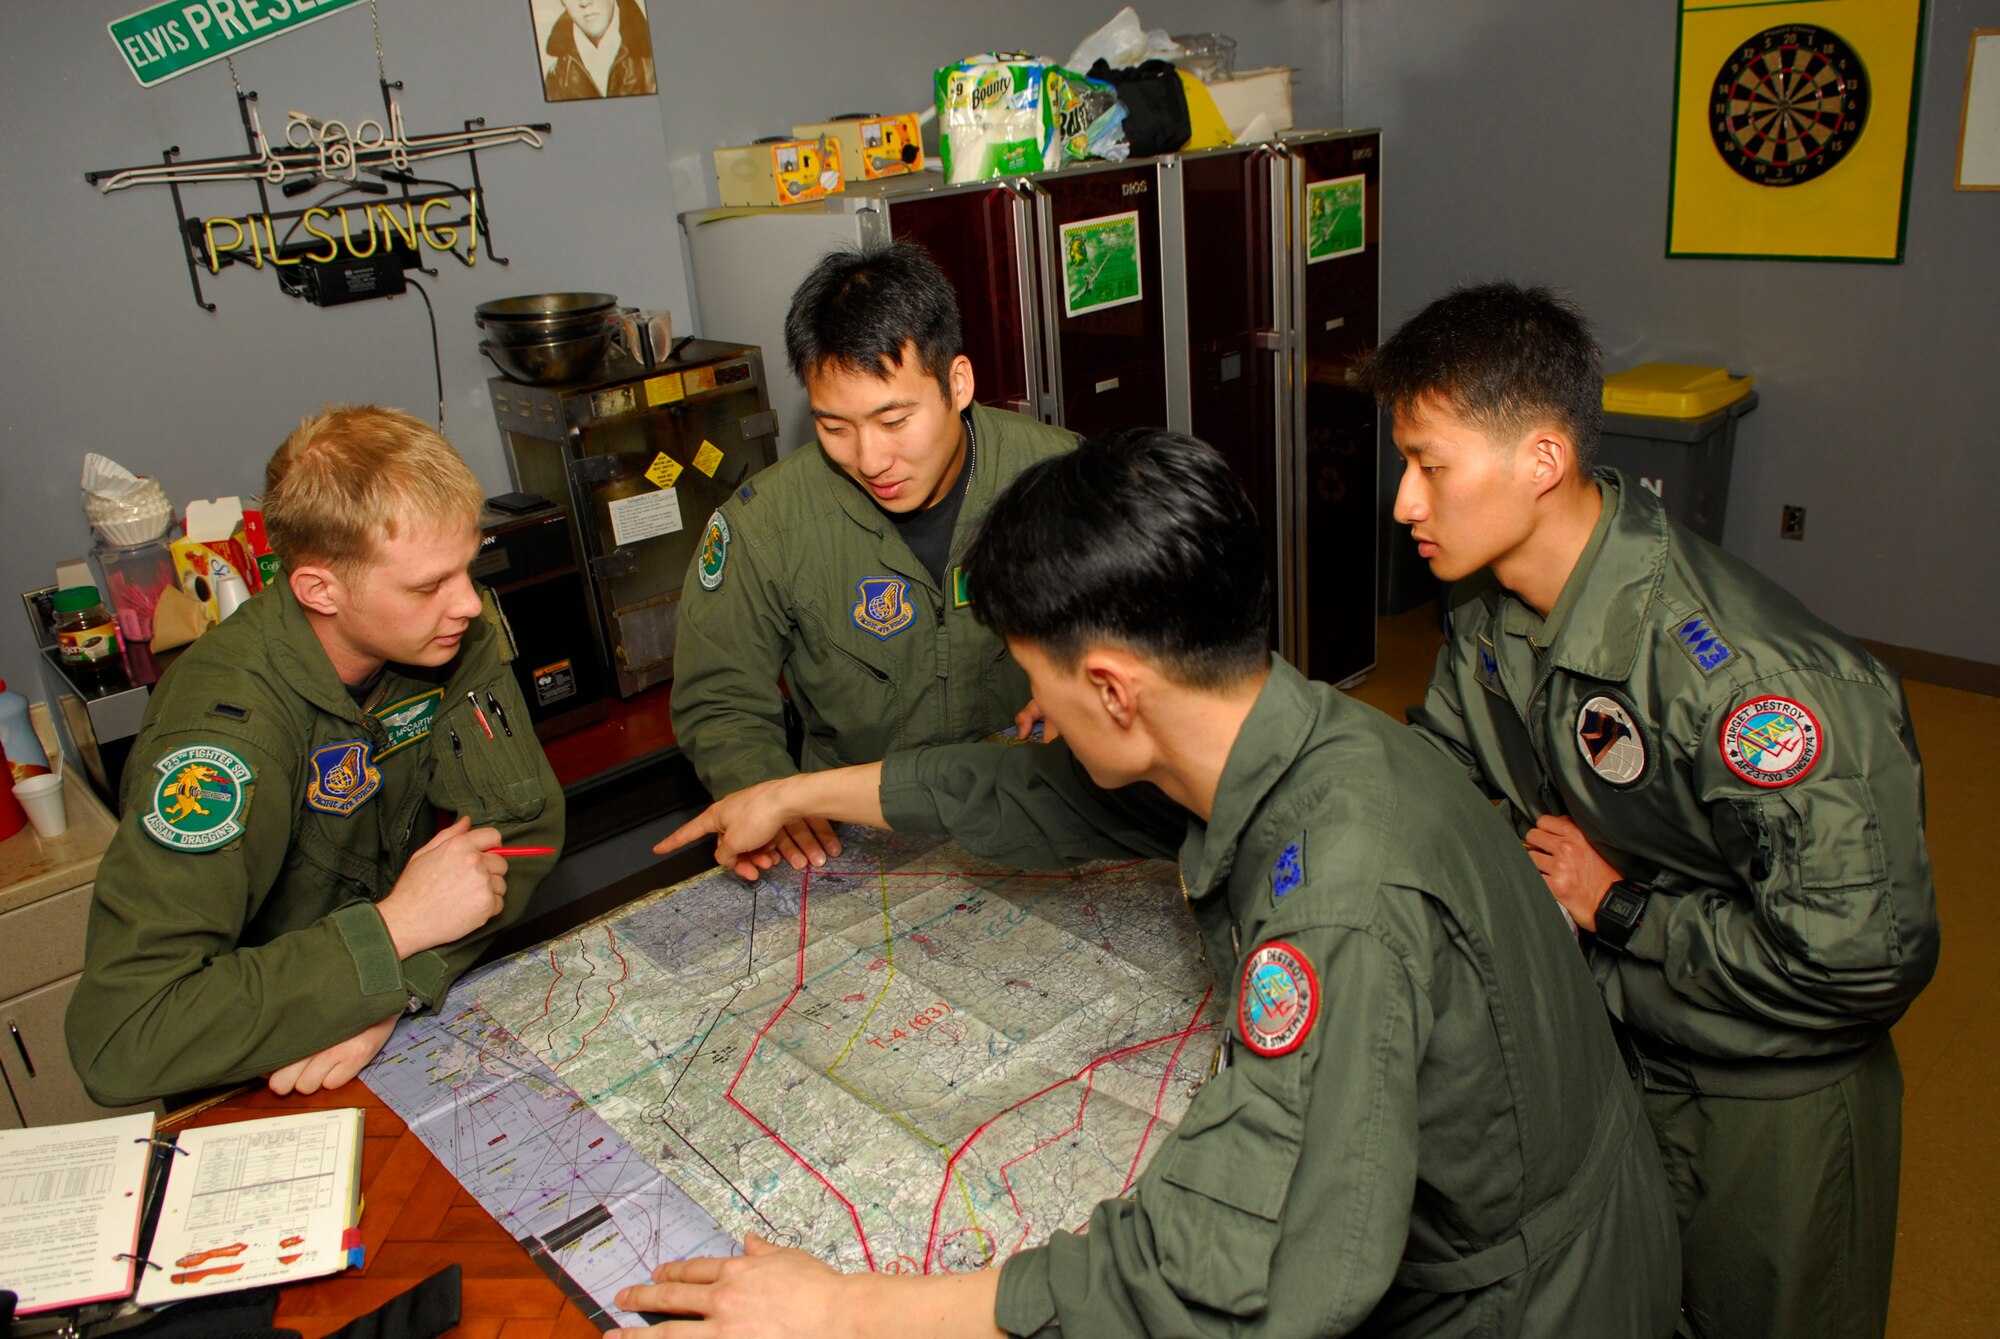 First Lieutenants Mike McCarthy and Al Chang from the 25th Fighter Squadron discuss their flight plans as they prepare for an upcoming mission with Capt. Pak, Chan Mu and Maj. Chong, Hyaon Dong from Republic of Korea Air Forces 15th Composite Wing.  The 51st Fighter Wing hosted a combined exchange exercise called the Buddy Wing Program this week, with the participation from 25 FS here and ROKAF 15 CW from Seoul Air Base. Aircrew members trained together in this program allowing both units to introduce tactics and improve interoperability between the U.S. Air Force and the Republic of Korea.  (U.S. Air Force photo by Senior Airman Stephenie Wade)